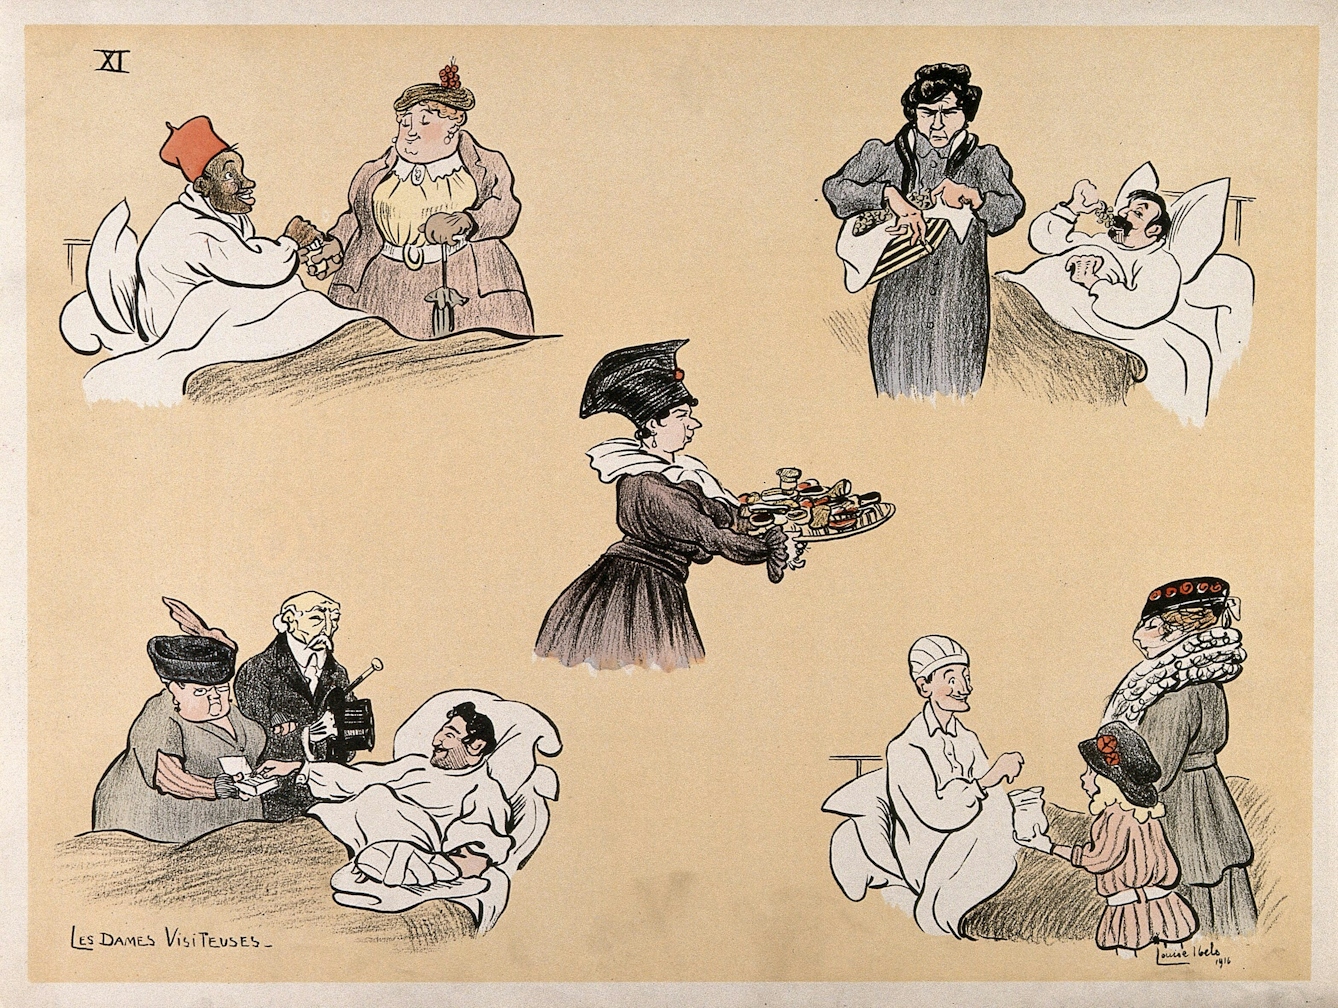 A page featuring five small illustrations of women brining gifts of food to men in hospital beds.